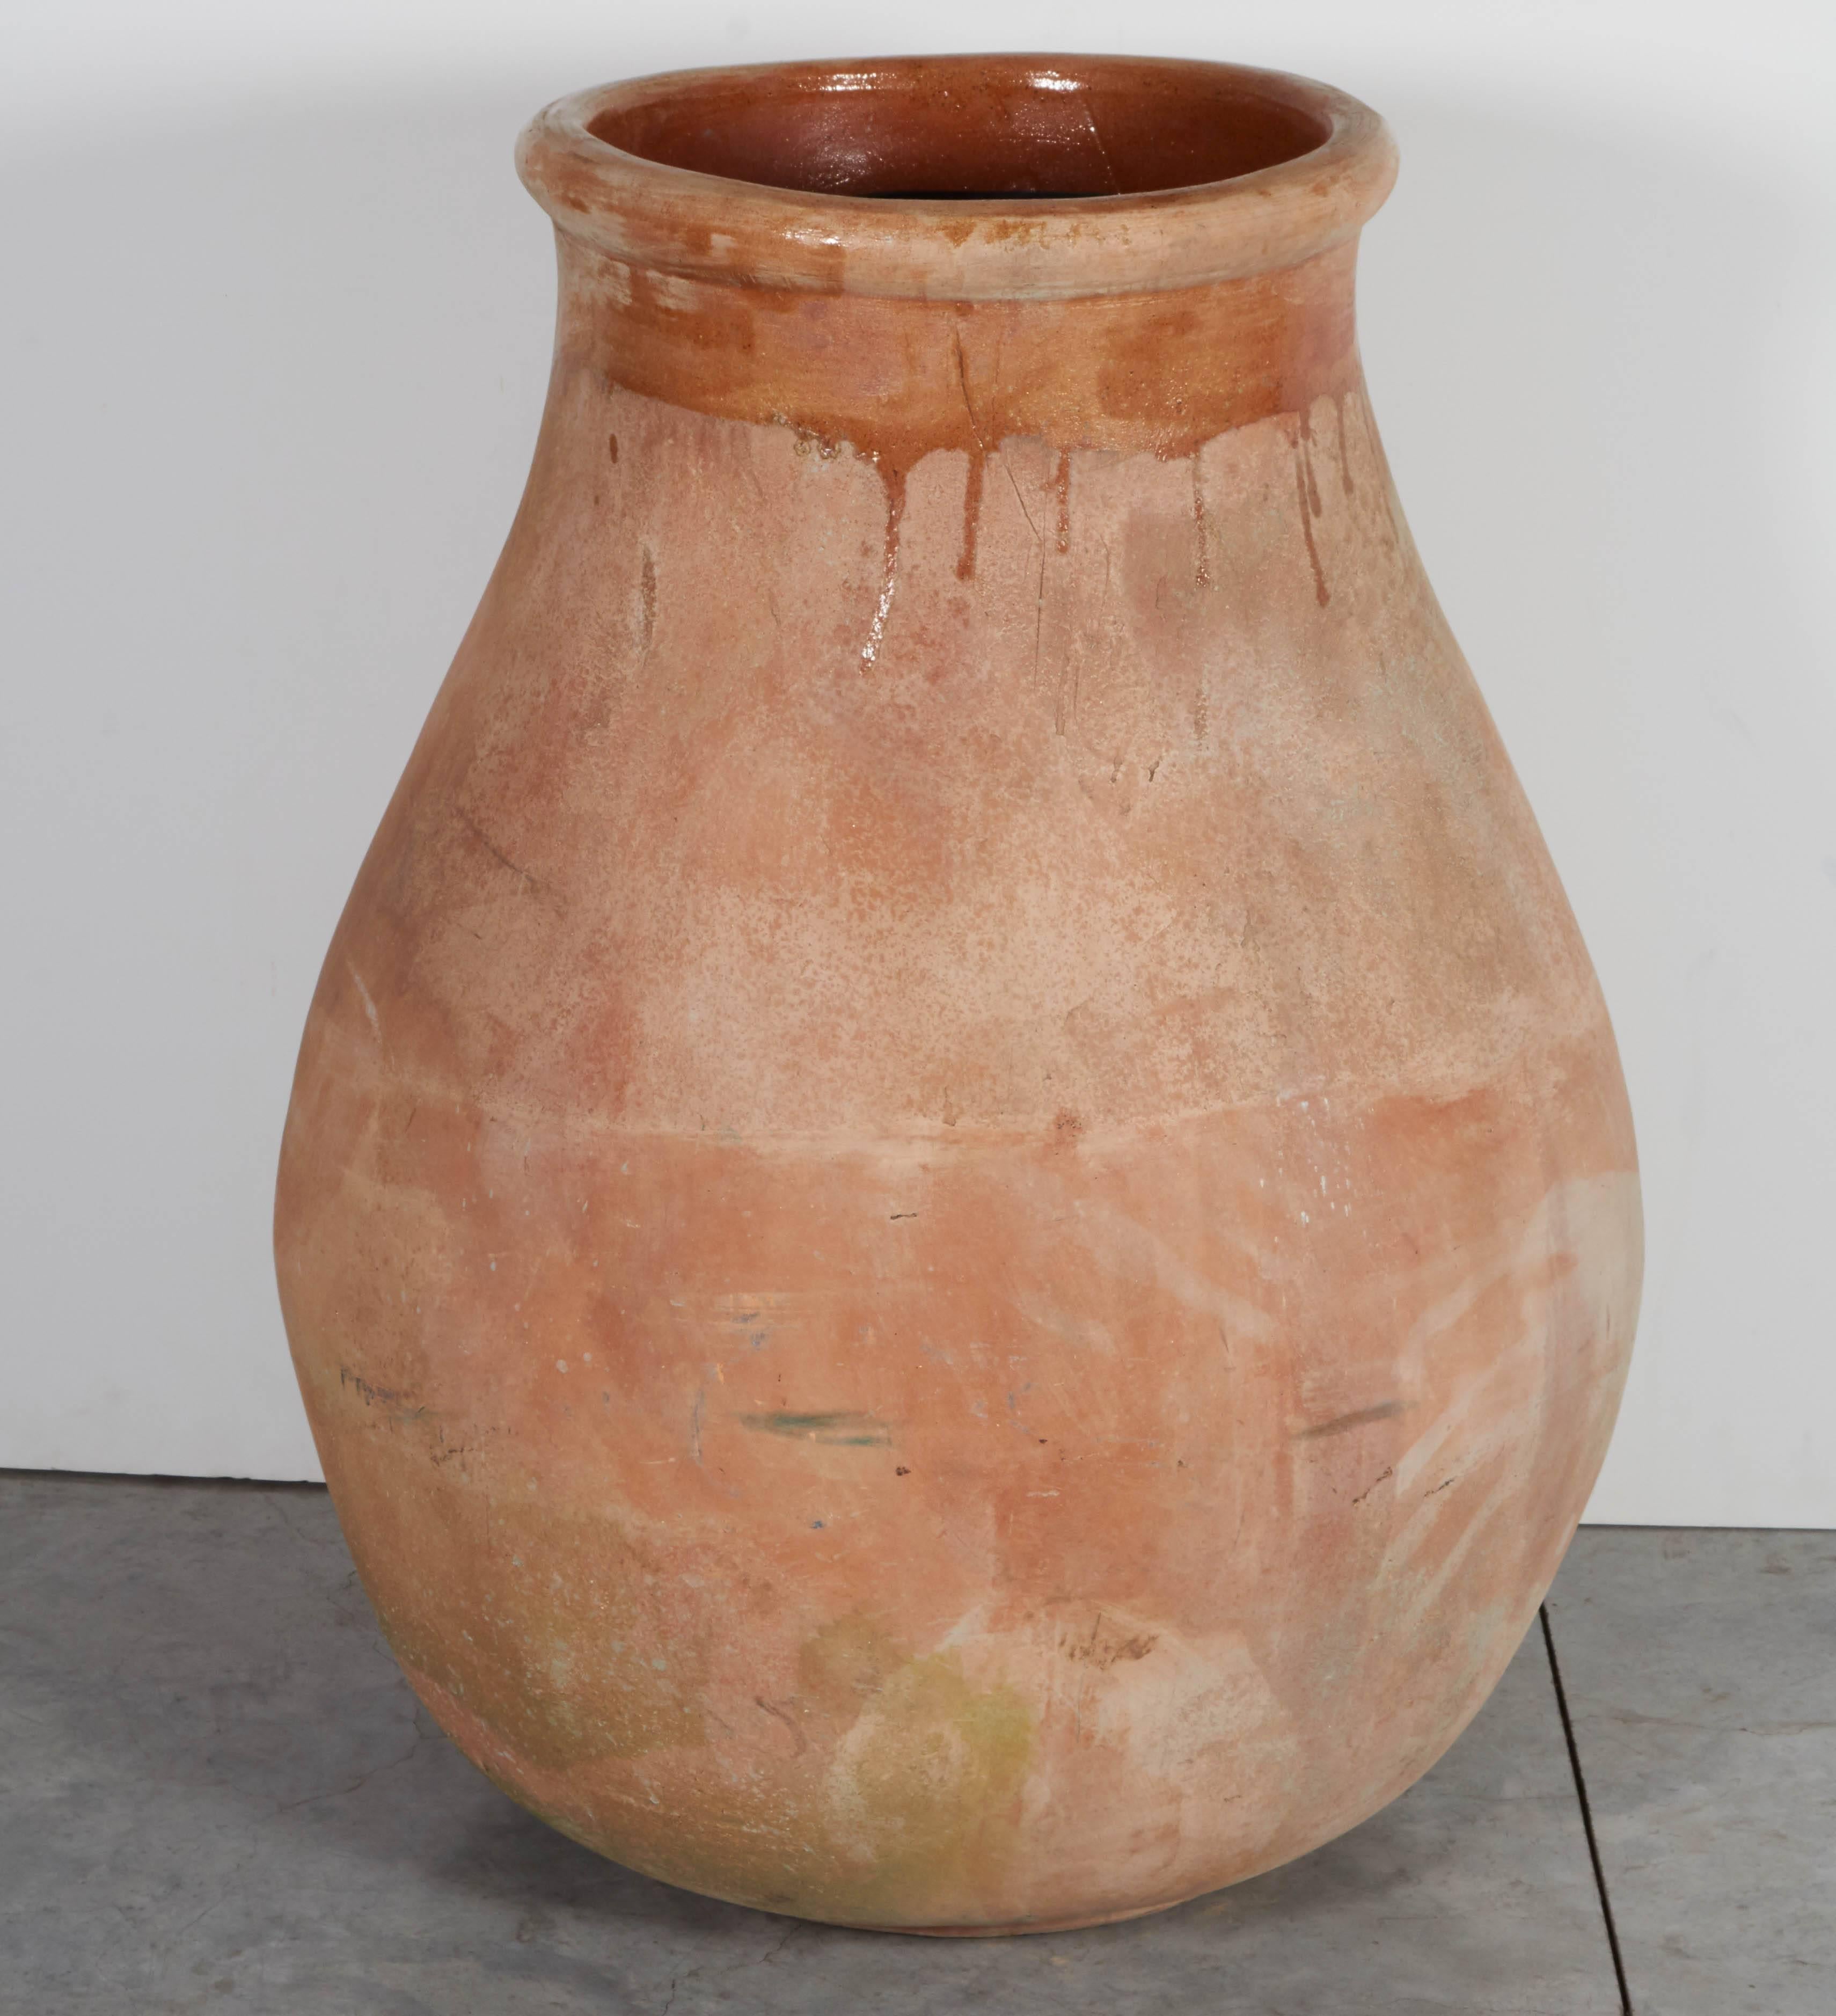 Tall, Graceful Earthenware Jar in Washed Out Mediterranean Hues In Good Condition For Sale In New York, NY